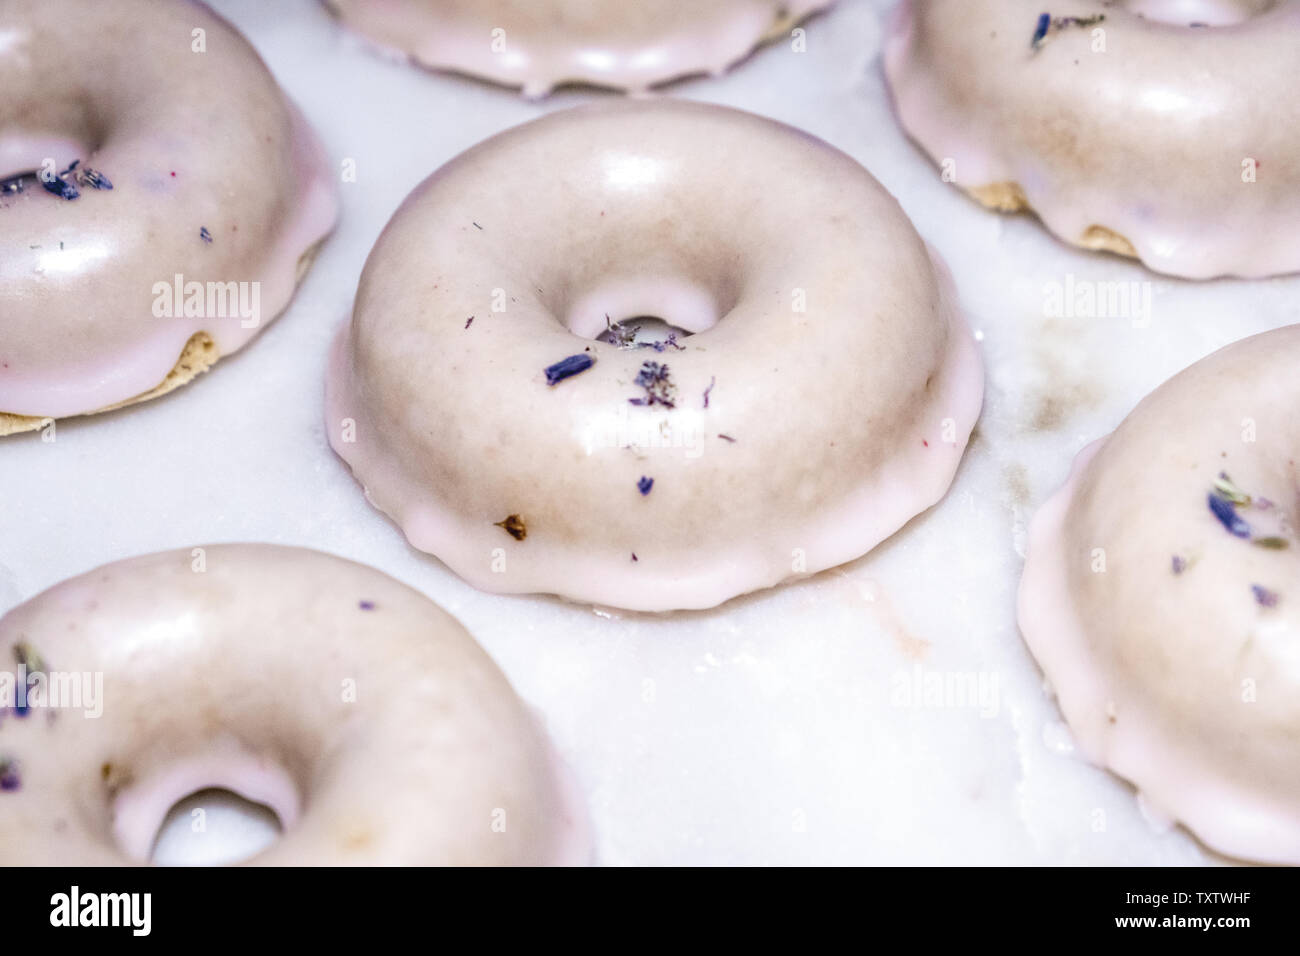 Lavender Doughnuts Dipped in Shiny White Glaze Sprinkled with Dried Lavender Flowers Sitting on a White Marble Surface Stock Photo